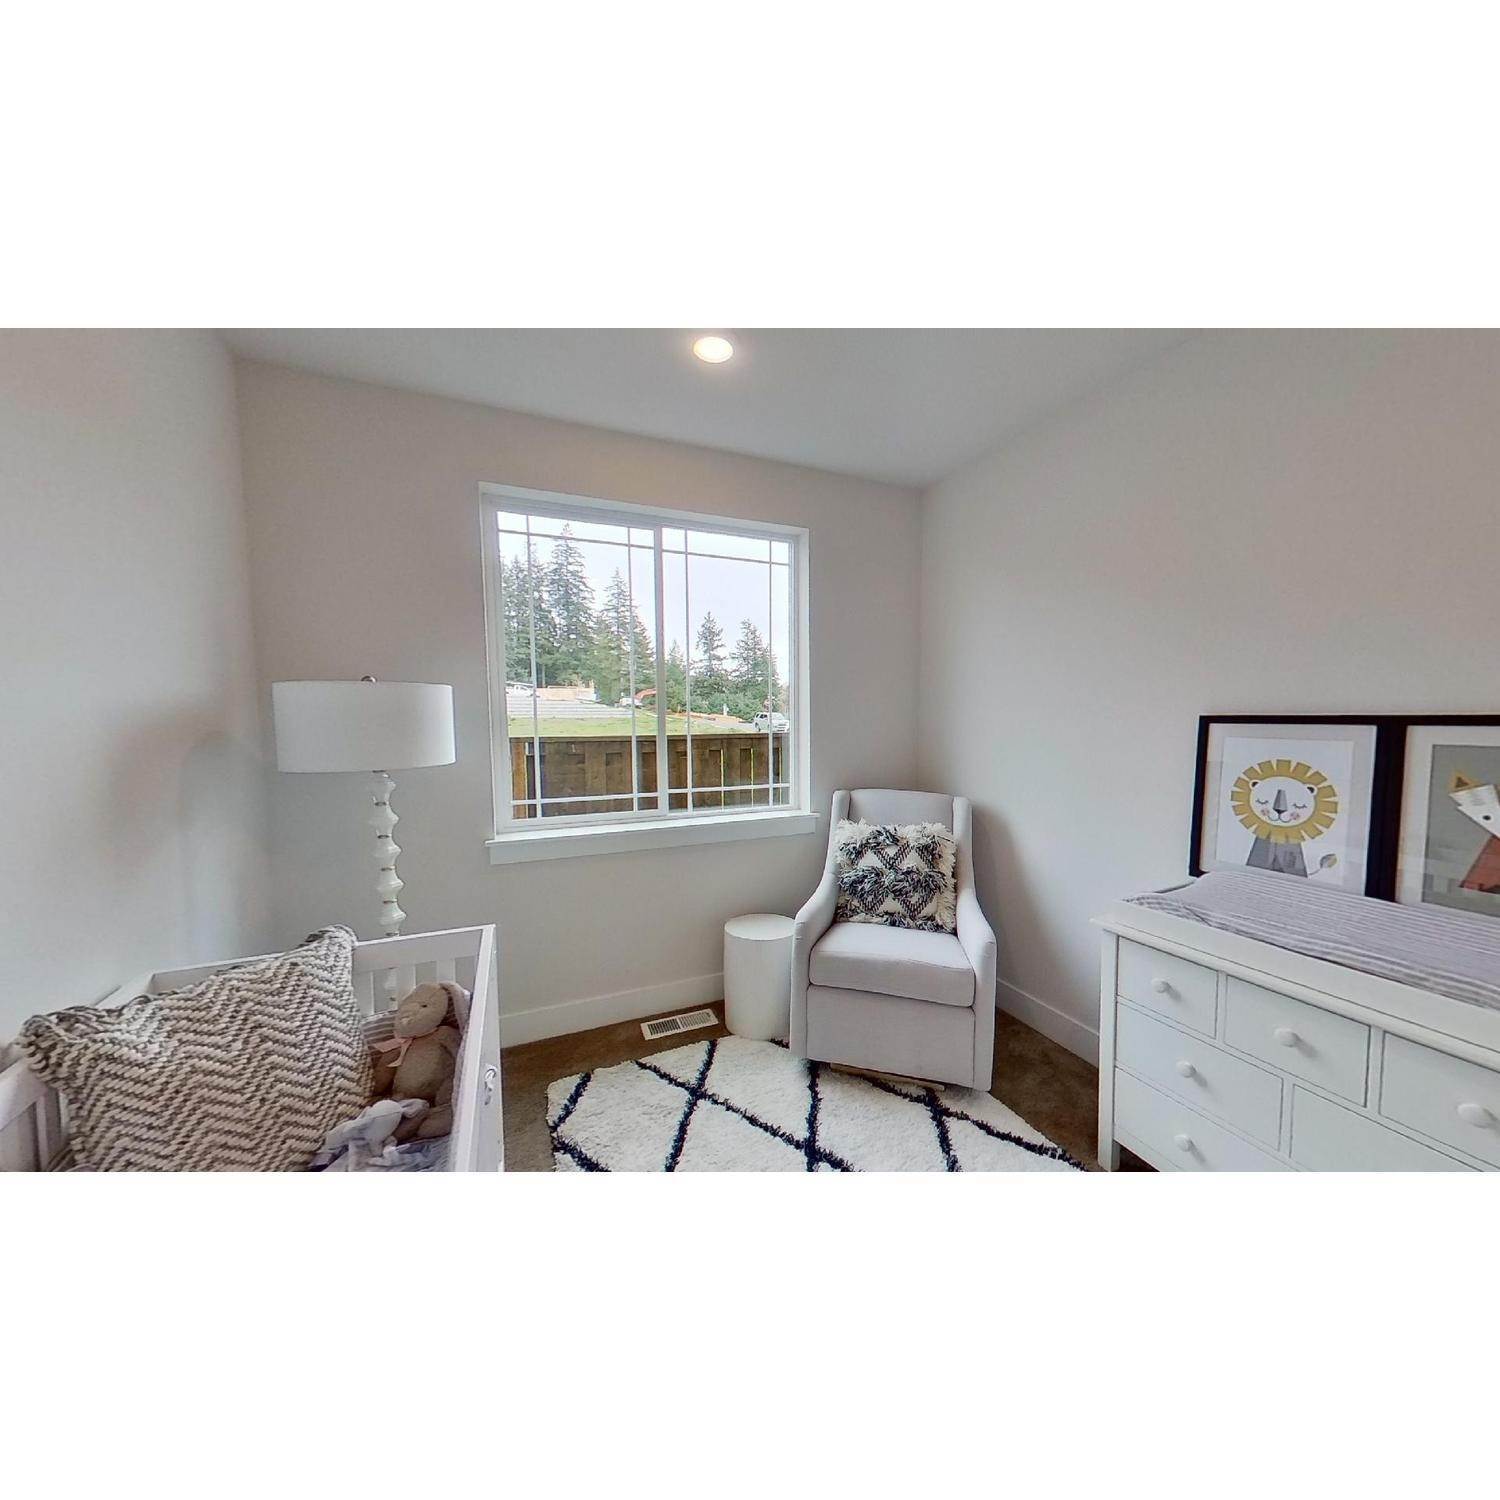 South River Terrace Innovate Condominiums建於 16786 SW Leaf Lane, Tigard, OR 97224